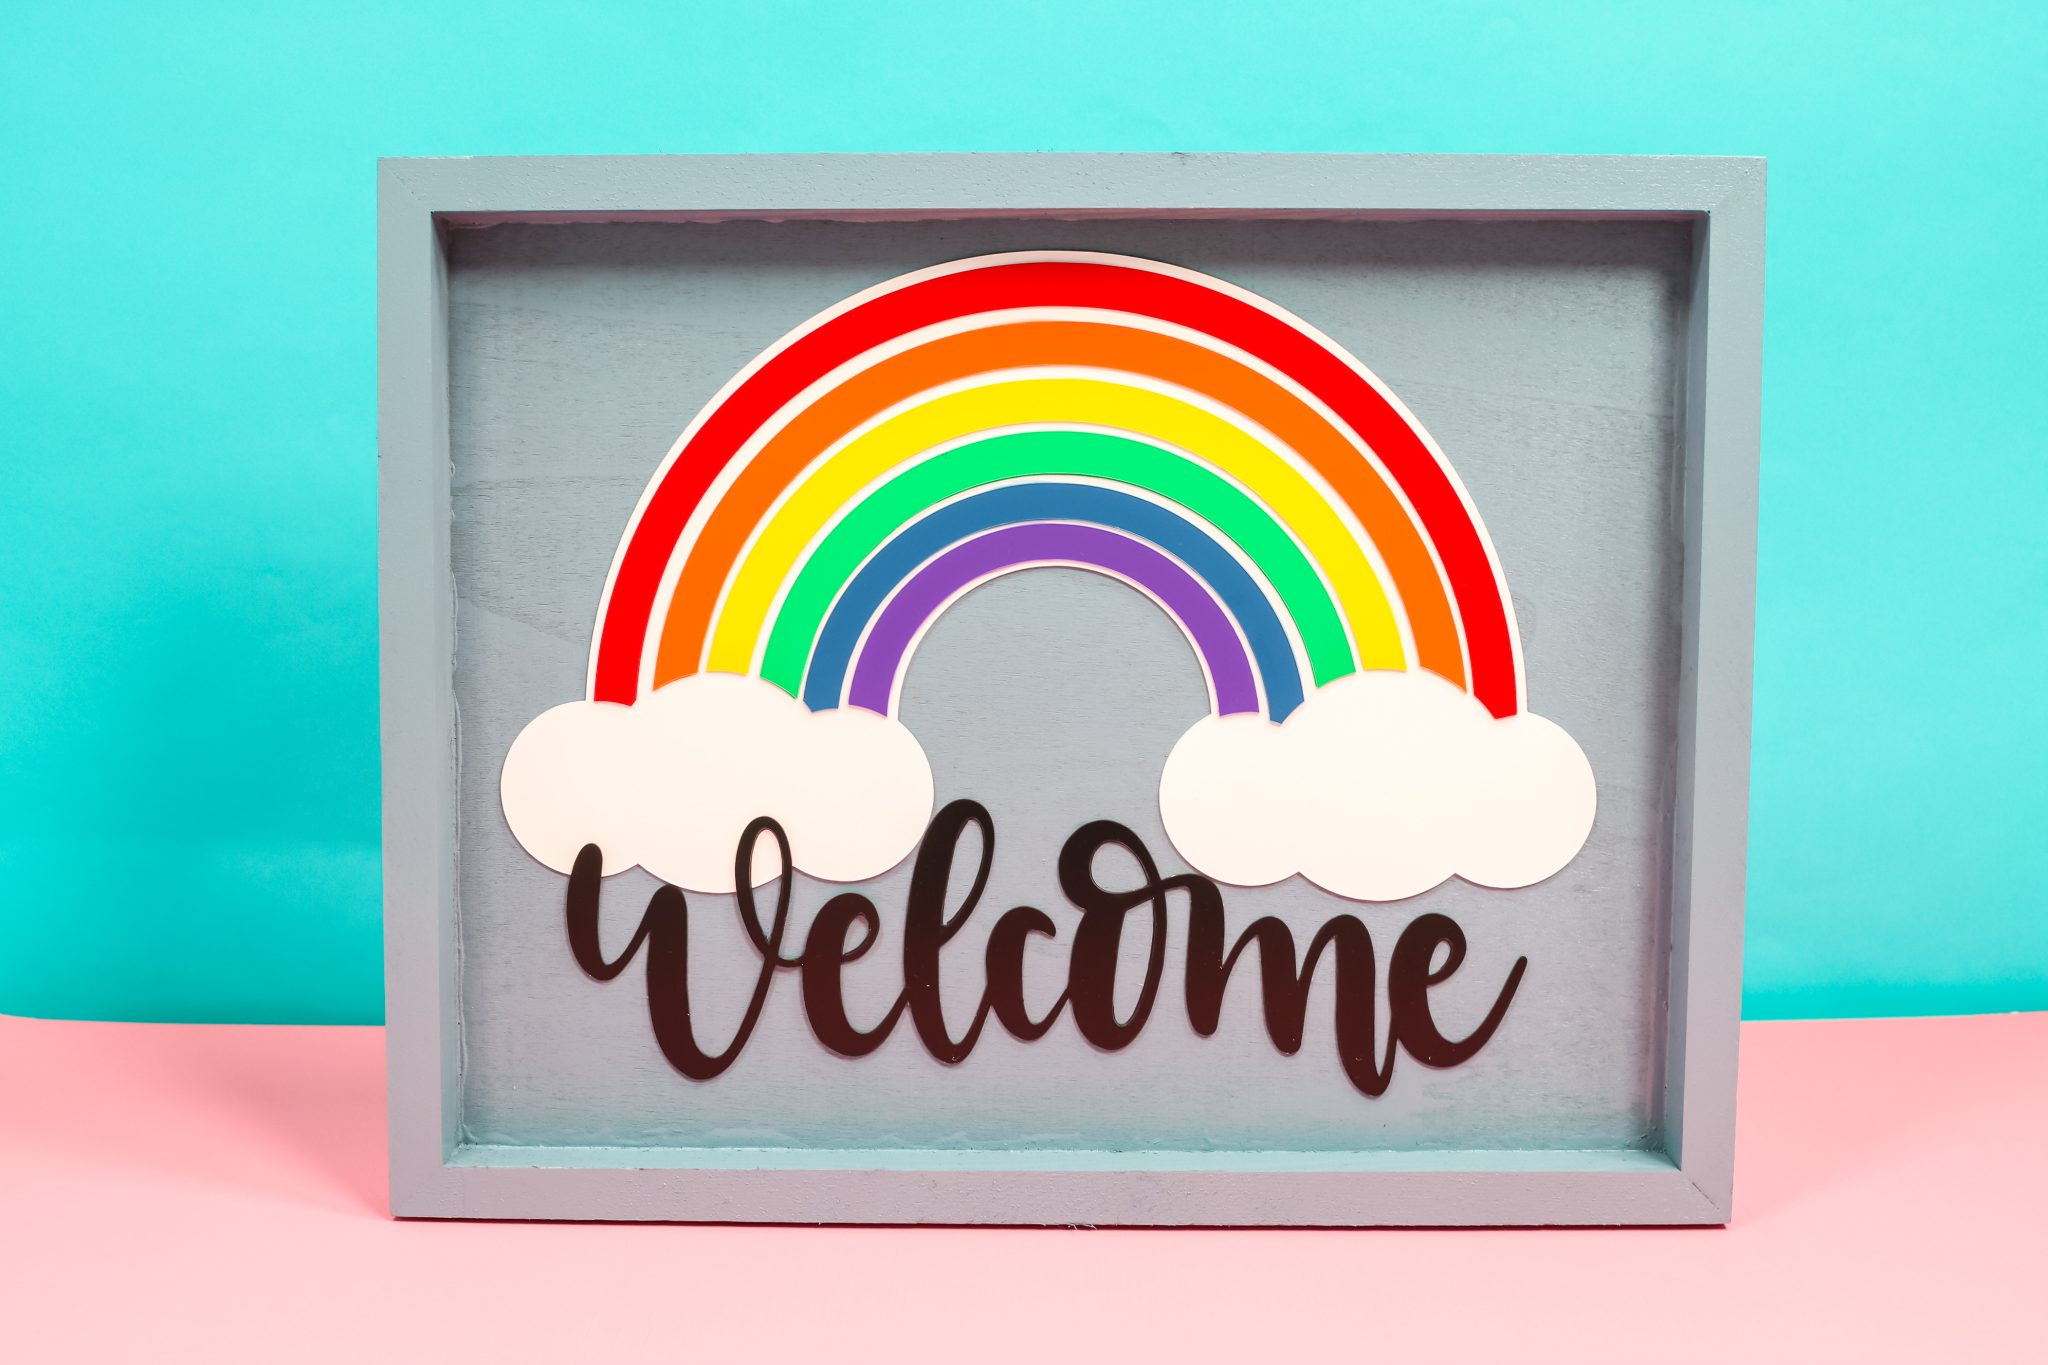 Finished welcome rainbow sign made with Cricut plastic.